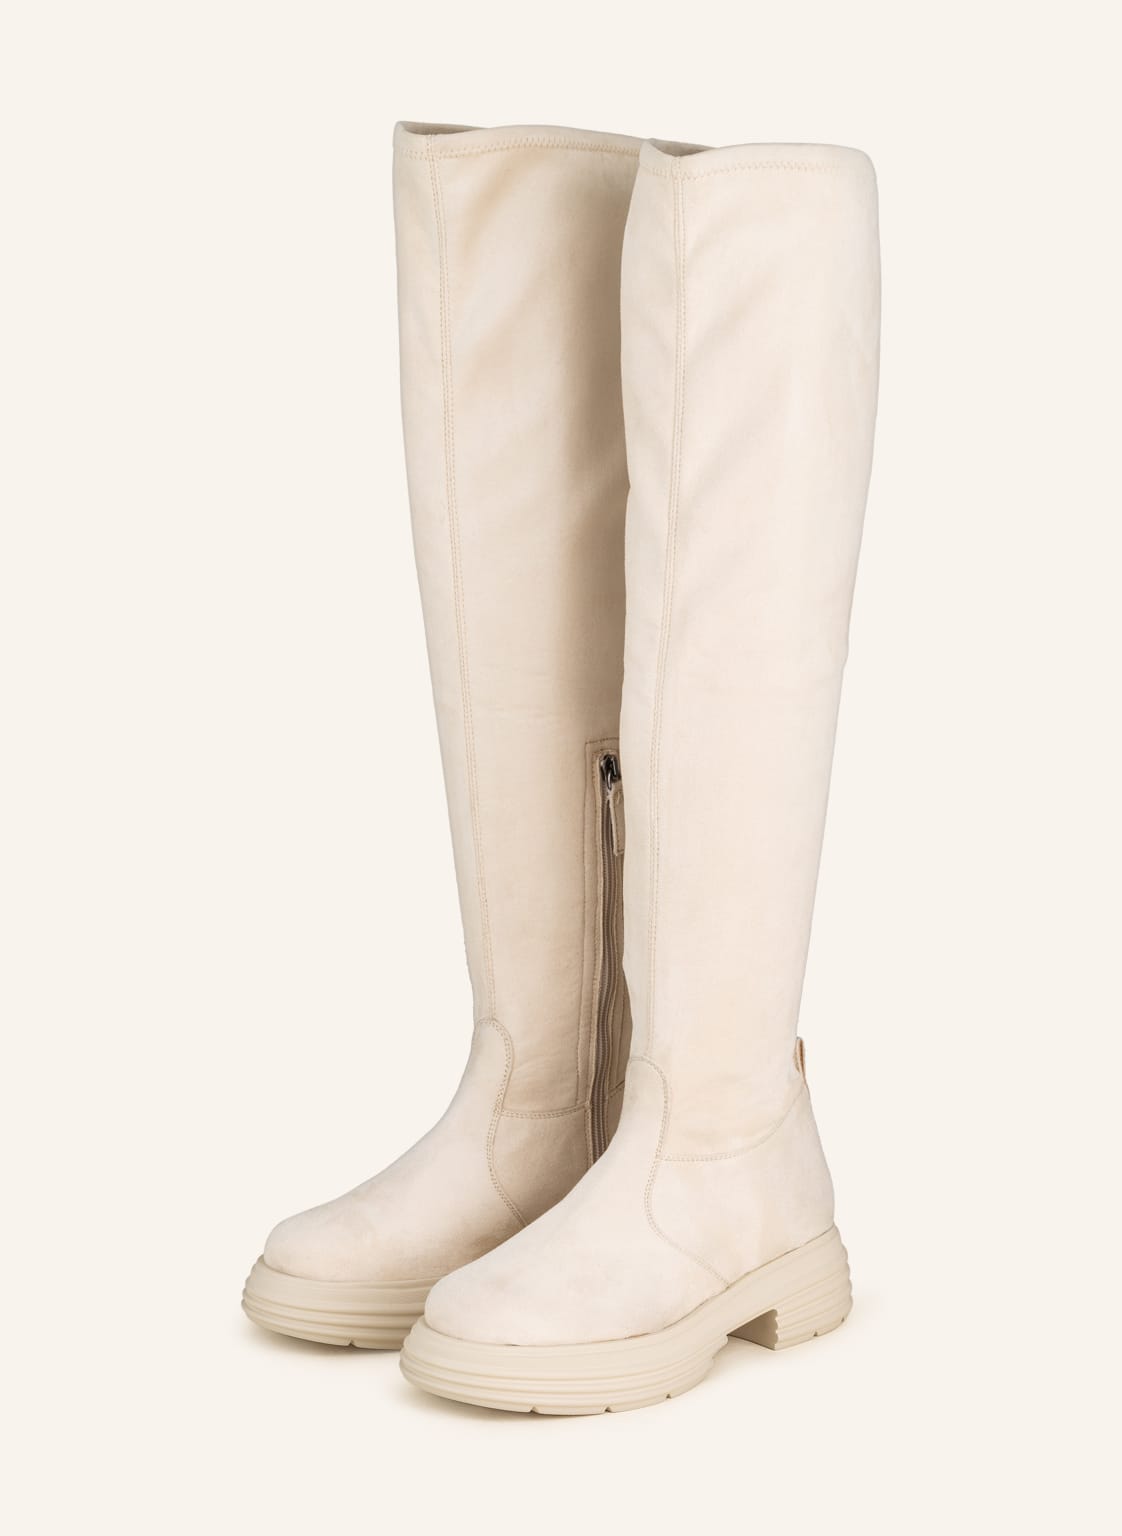 Image of No Claim Overknee-Stiefel Foina 3 weiss